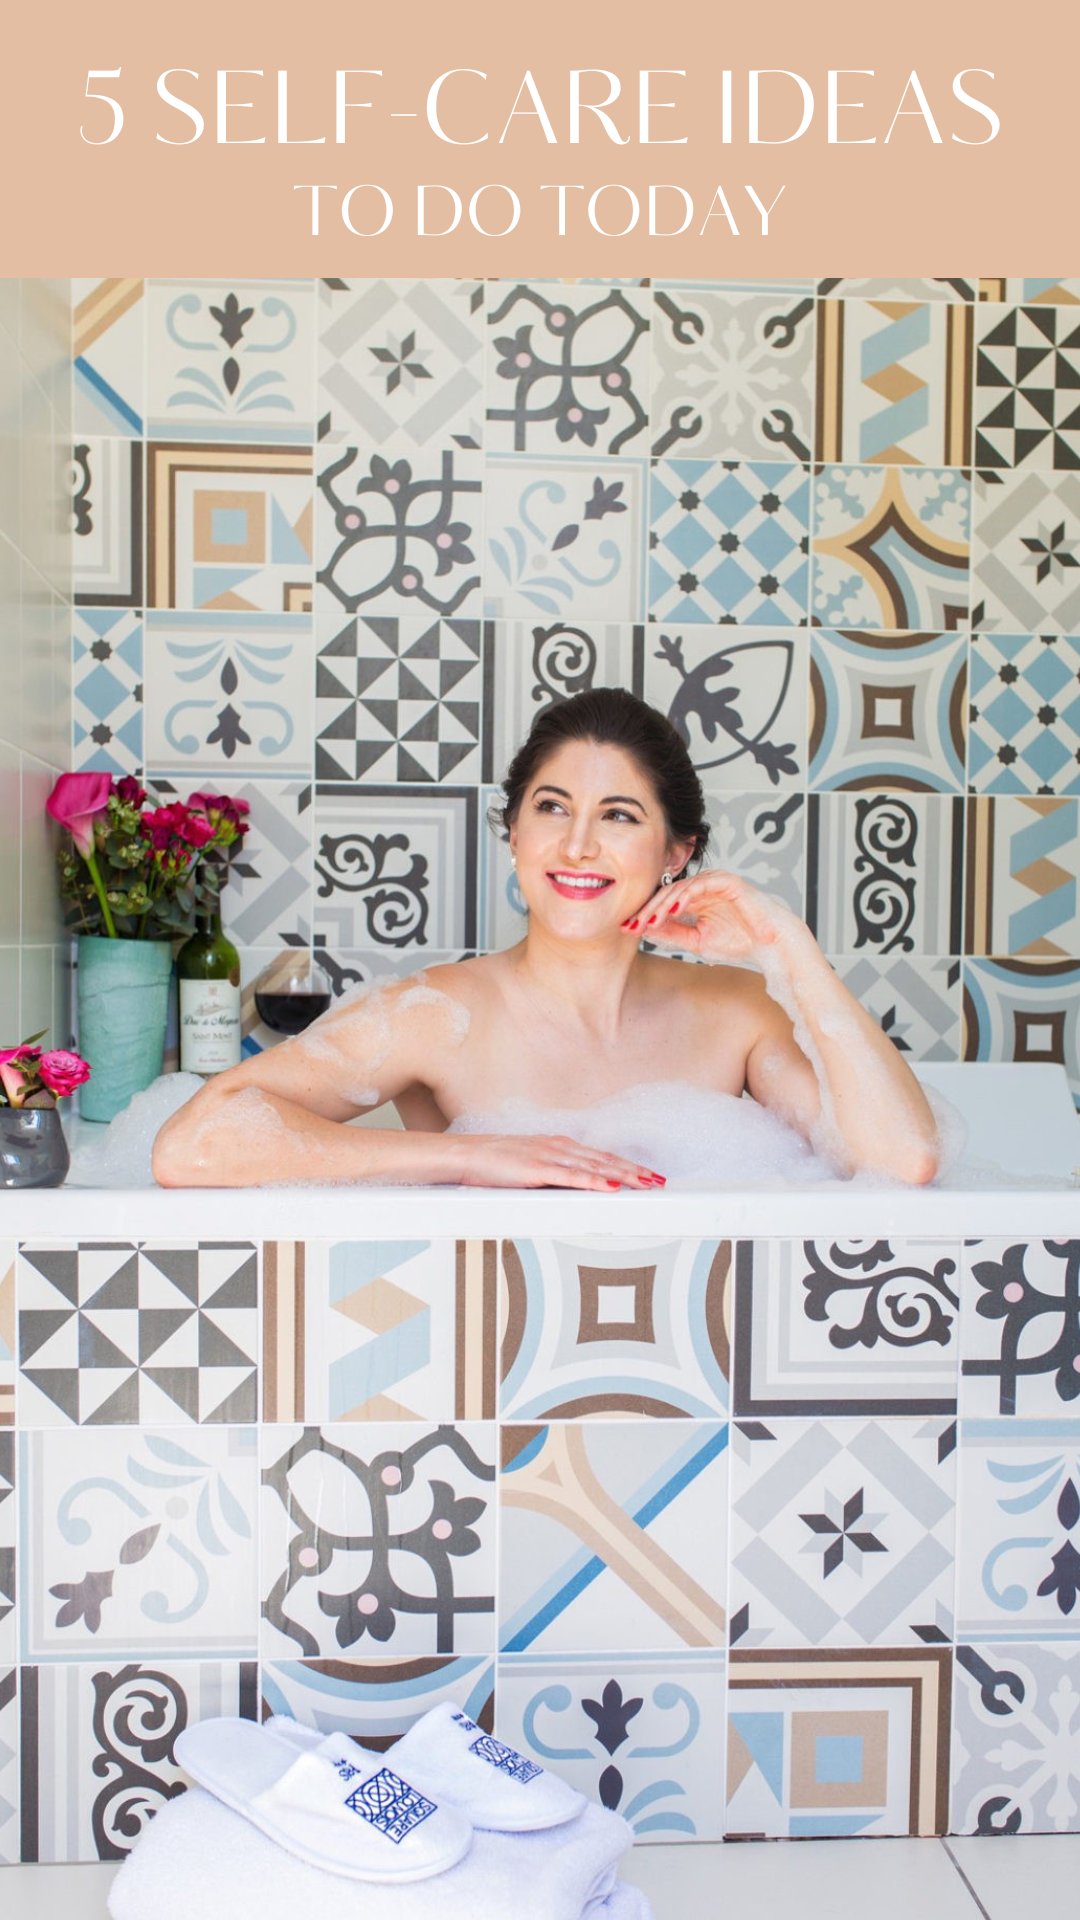 5 Self-Care Ideas to Do Today by Lifestyle Blogger Laura Lily, Self-Care Ideas, DIY Spa Tips,